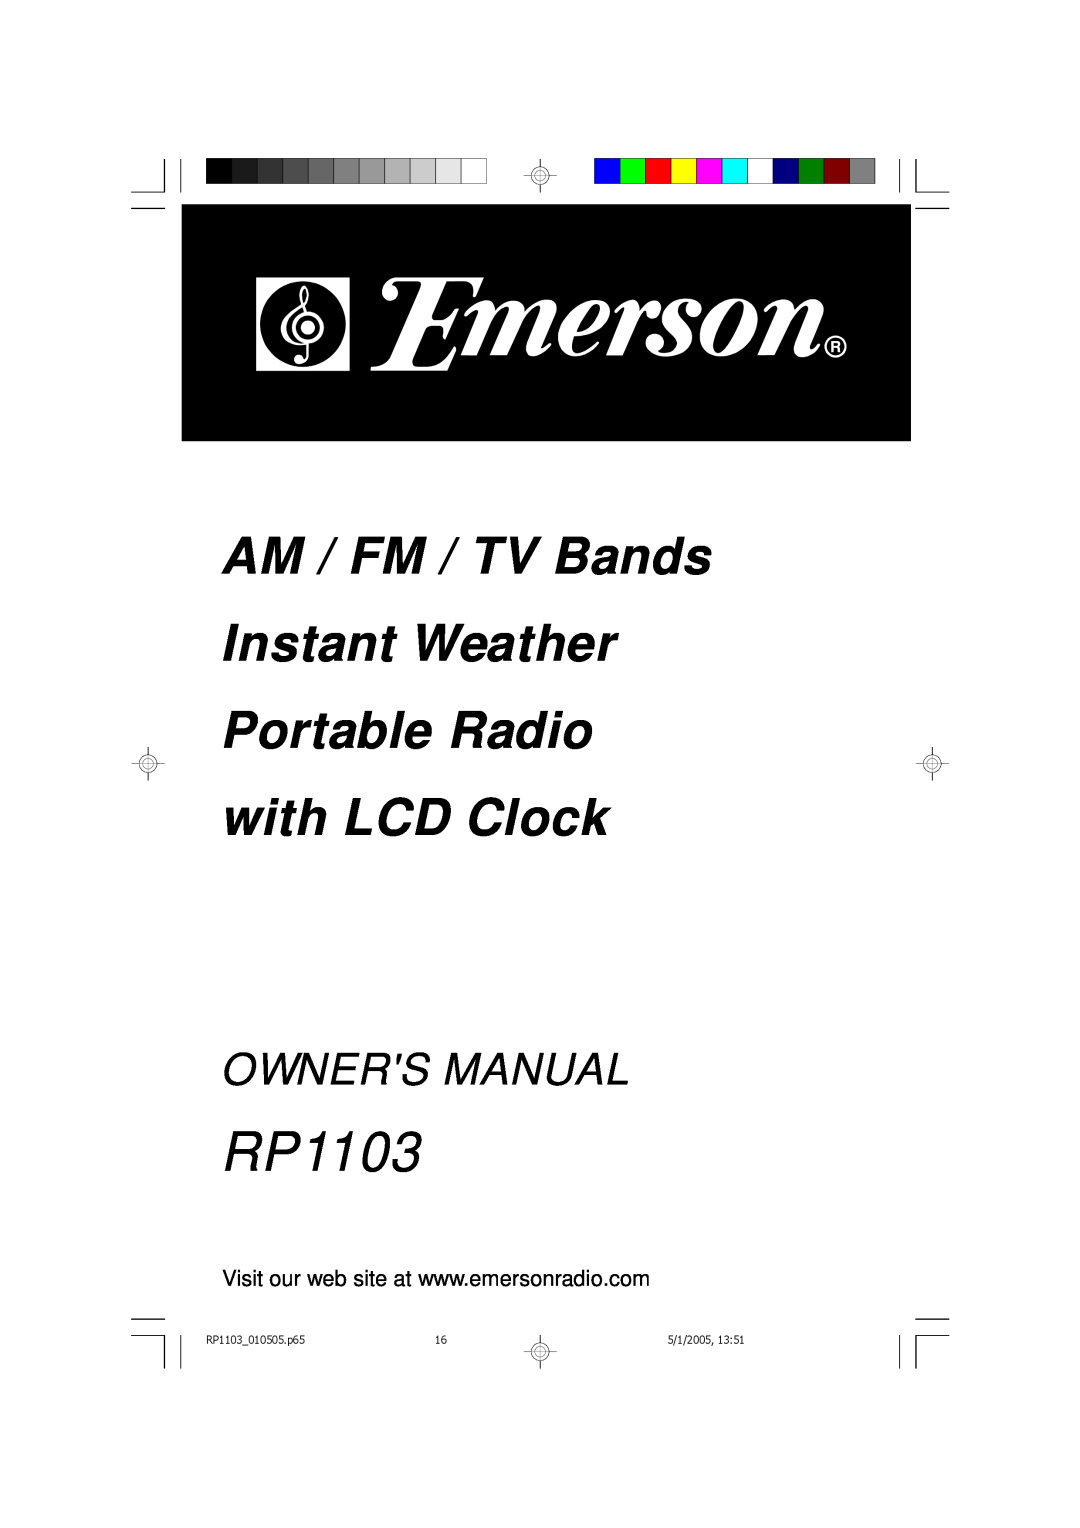 Emerson owner manual AM / FM / TV Bands Instant Weather Portable Radio with LCD Clock, RP1103010505.p65, 5/1/2005 